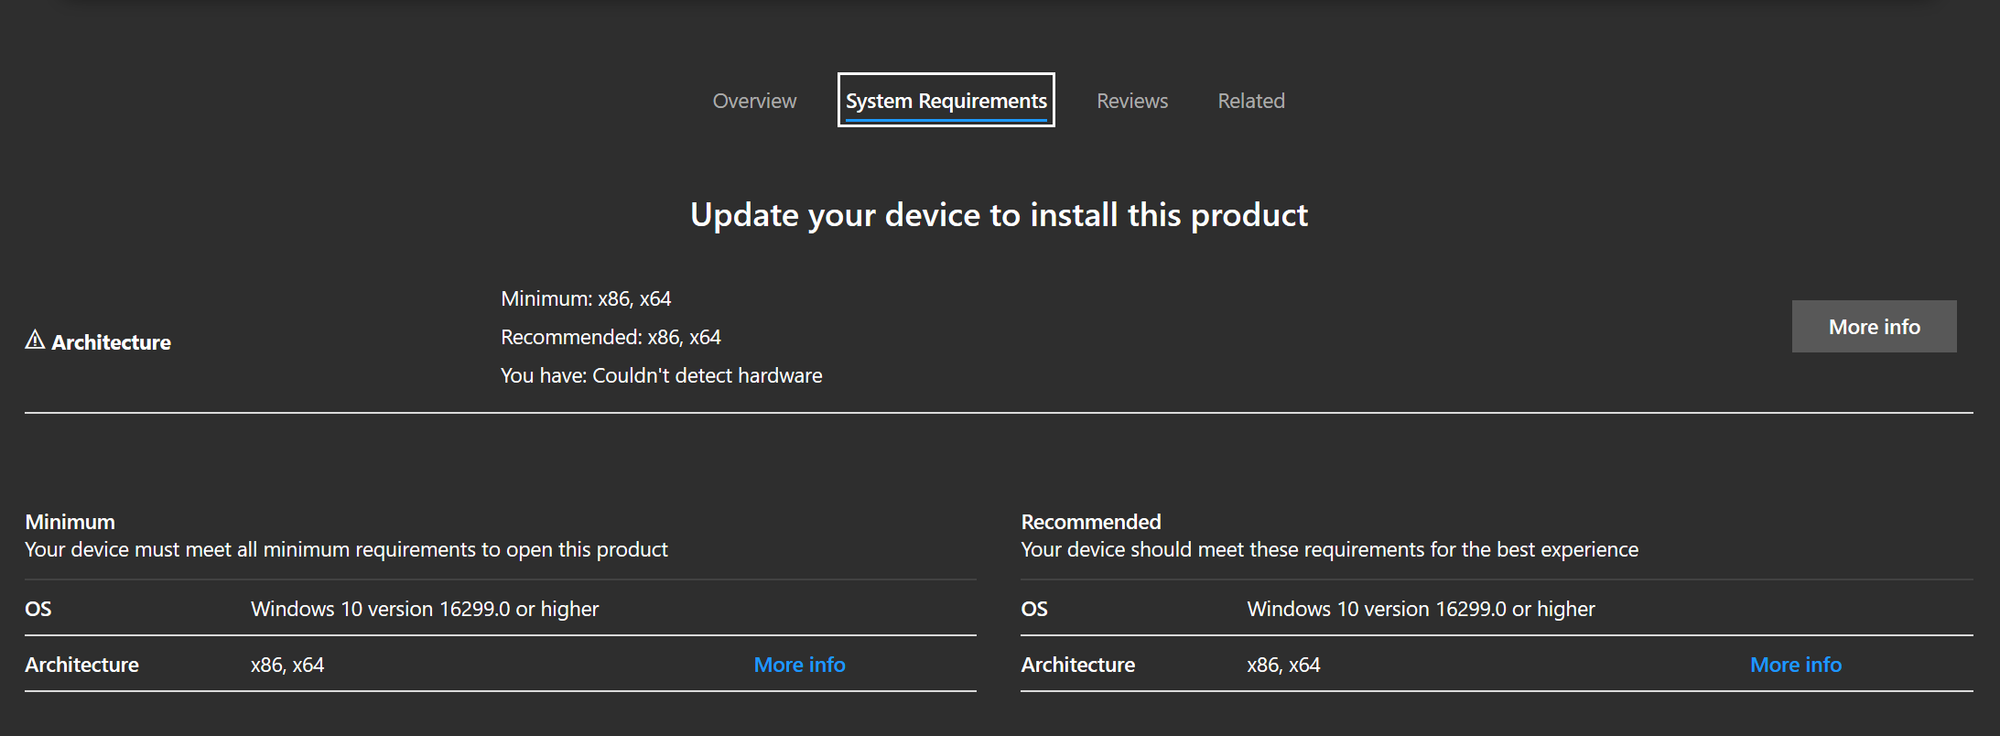 MS Store will not detect hardware. 2a0fc94b-a6e4-4763-b605-beed461c7b81?upload=true.png